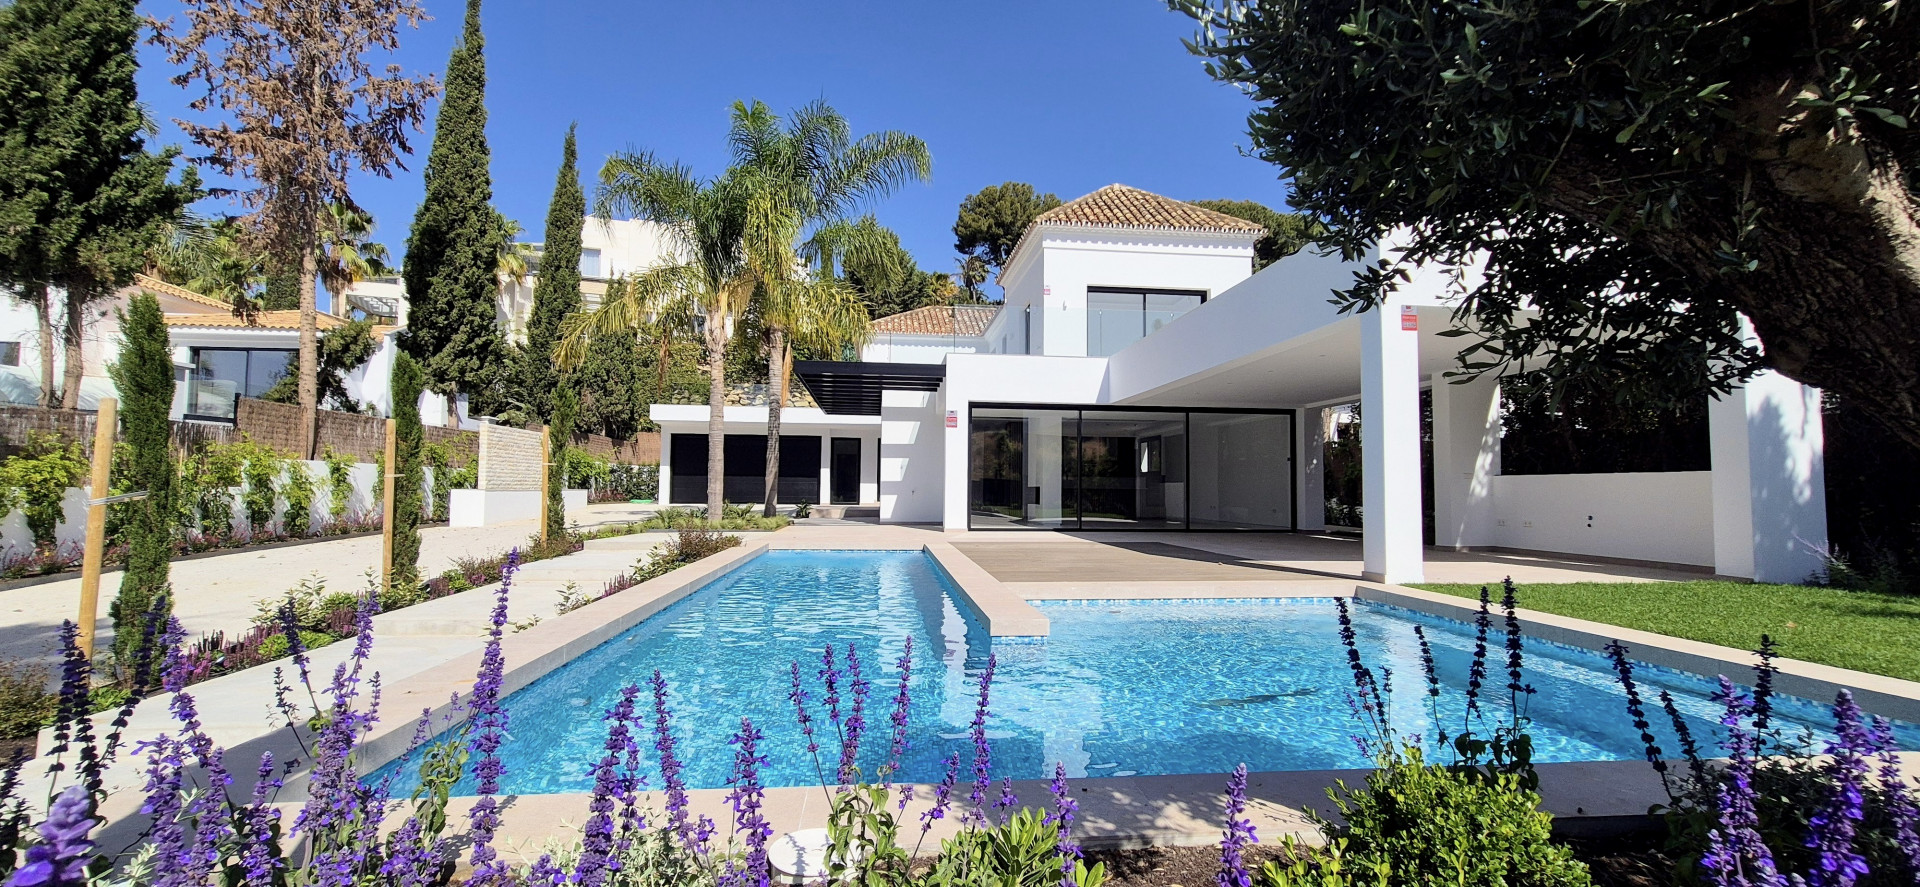 Beautiful newly built property located in Paraiso Alto, a privileged area surrounded by the best golf courses in Costa del Sol